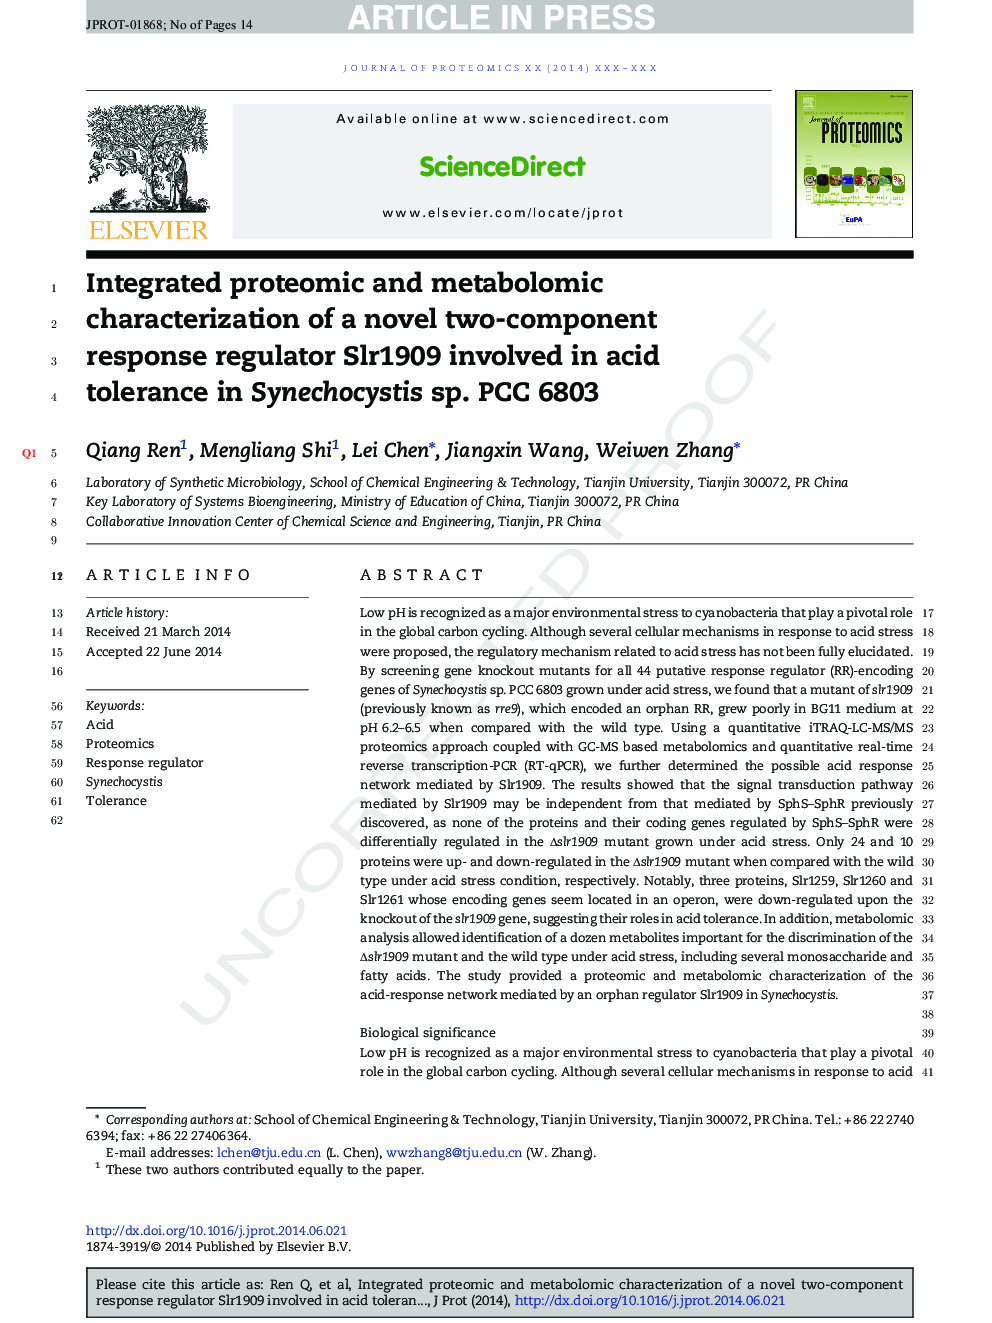 Integrated proteomic and metabolomic characterization of a novel two-component response regulator Slr1909 involved in acid tolerance in Synechocystis sp. PCC 6803